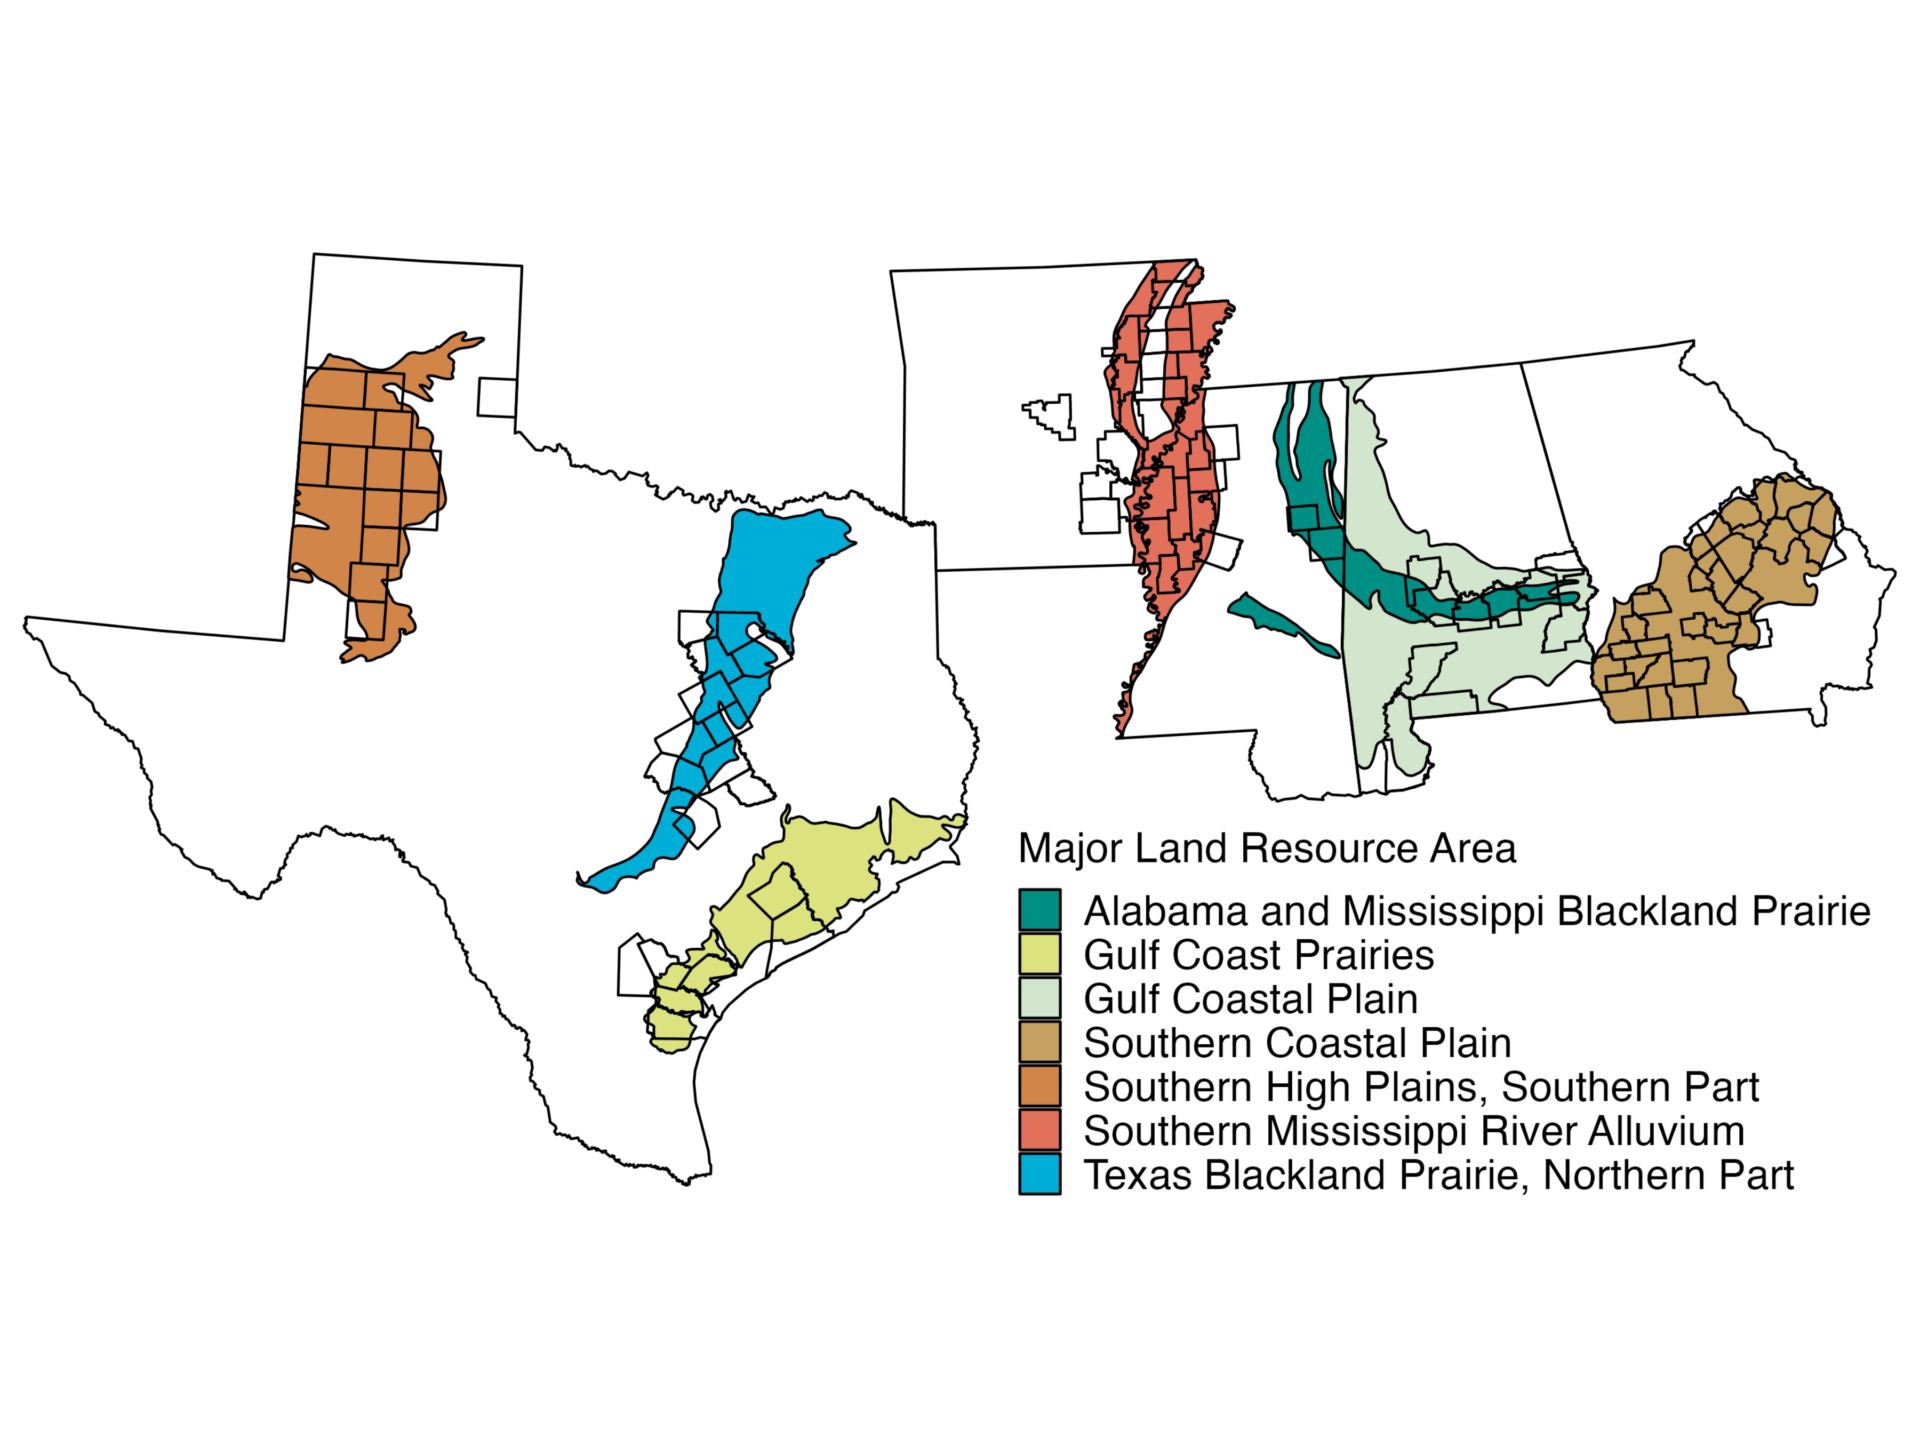 Map of Counties Sampled. Major Land Resource Area. Alabama and Mississippi Blackland Prairie, Gulf Coast Prairies, Gulf Coast Plain, Southern Coastal Plain, Southern High Plains (Southern Part), Southern Mississippi River Alluvium, Texas Blackland Prairie (Northern Part)